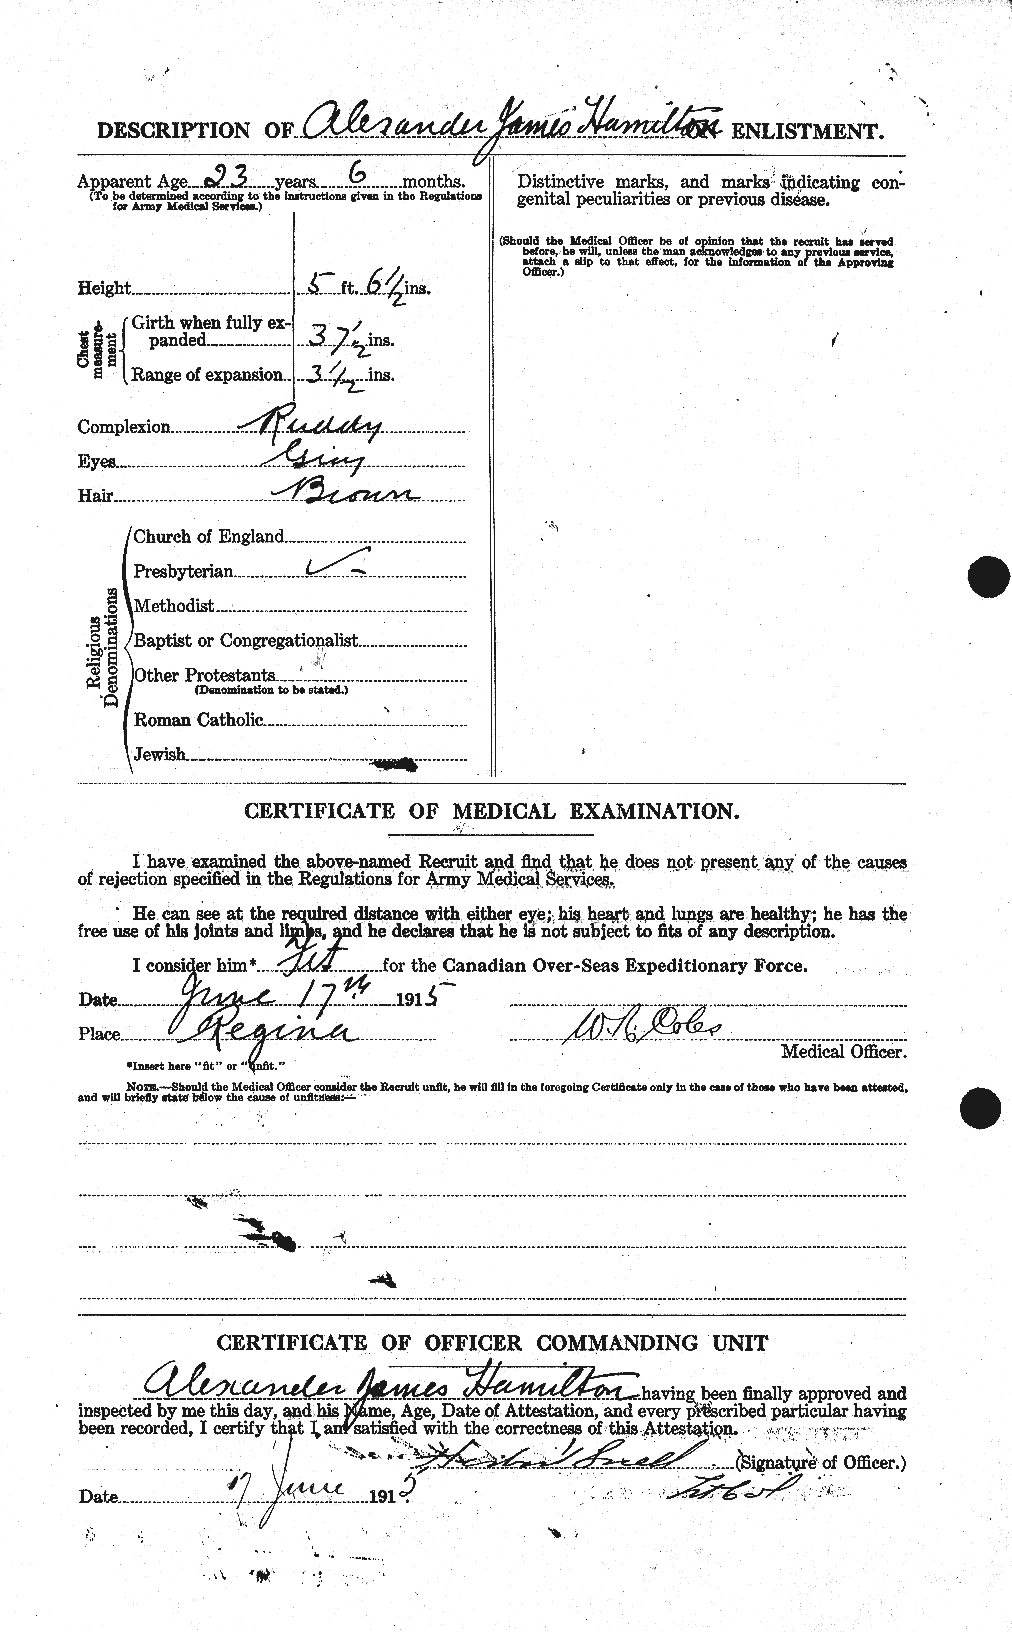 Personnel Records of the First World War - CEF 375205b